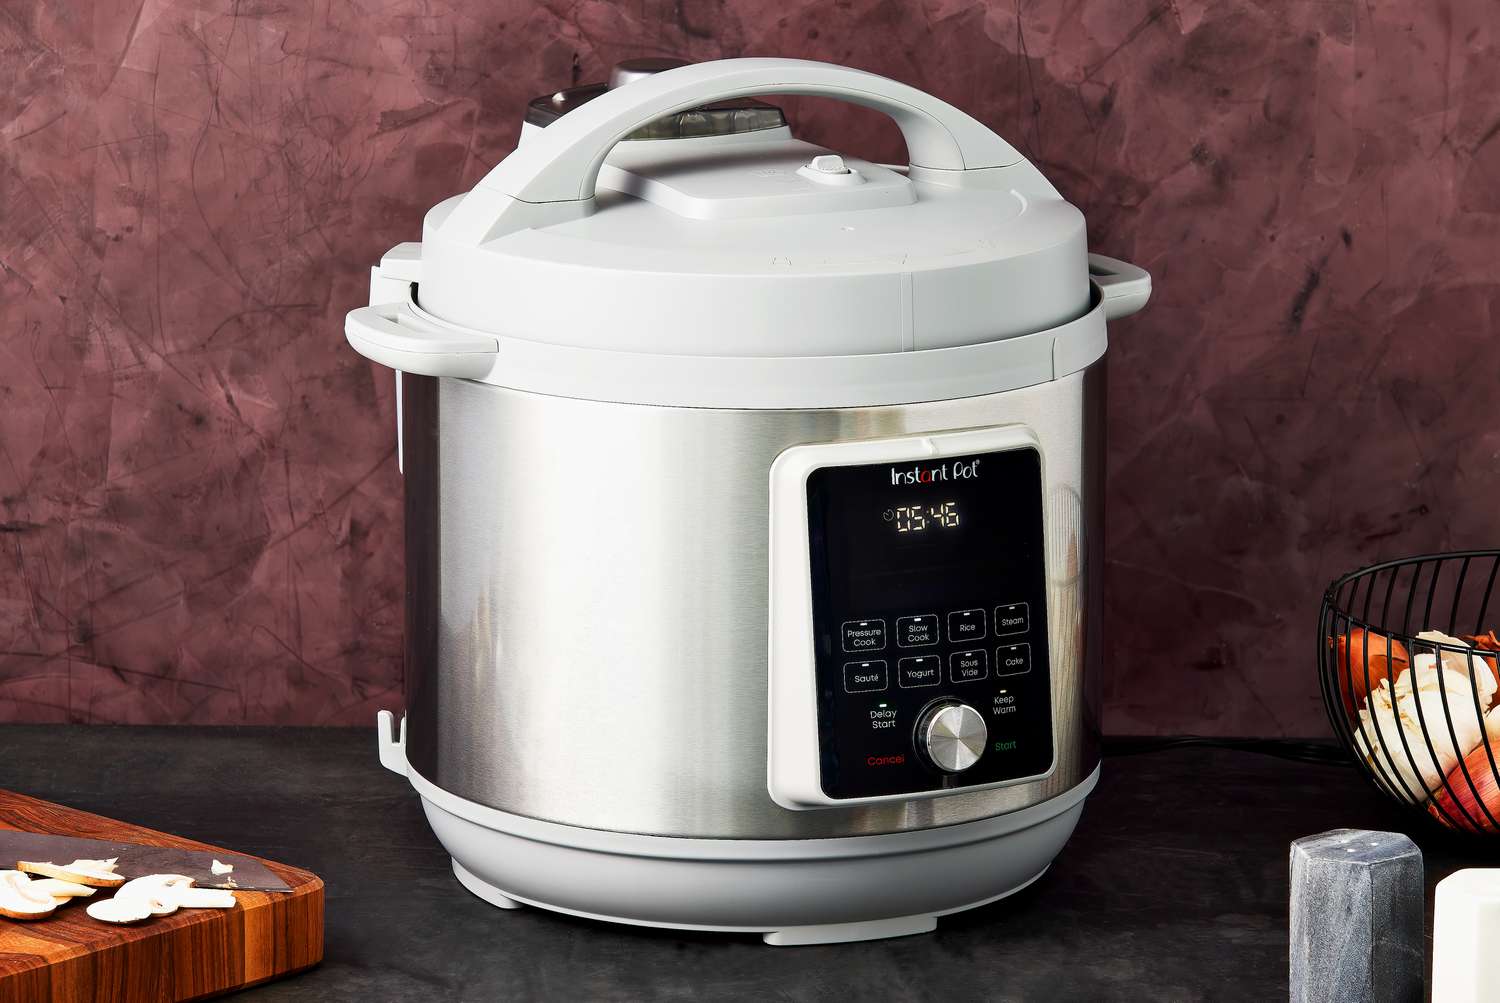 IRIS USA 3 Qt. 8-in-1 Electric Pressure Cooker, Slow Cooker, Rice